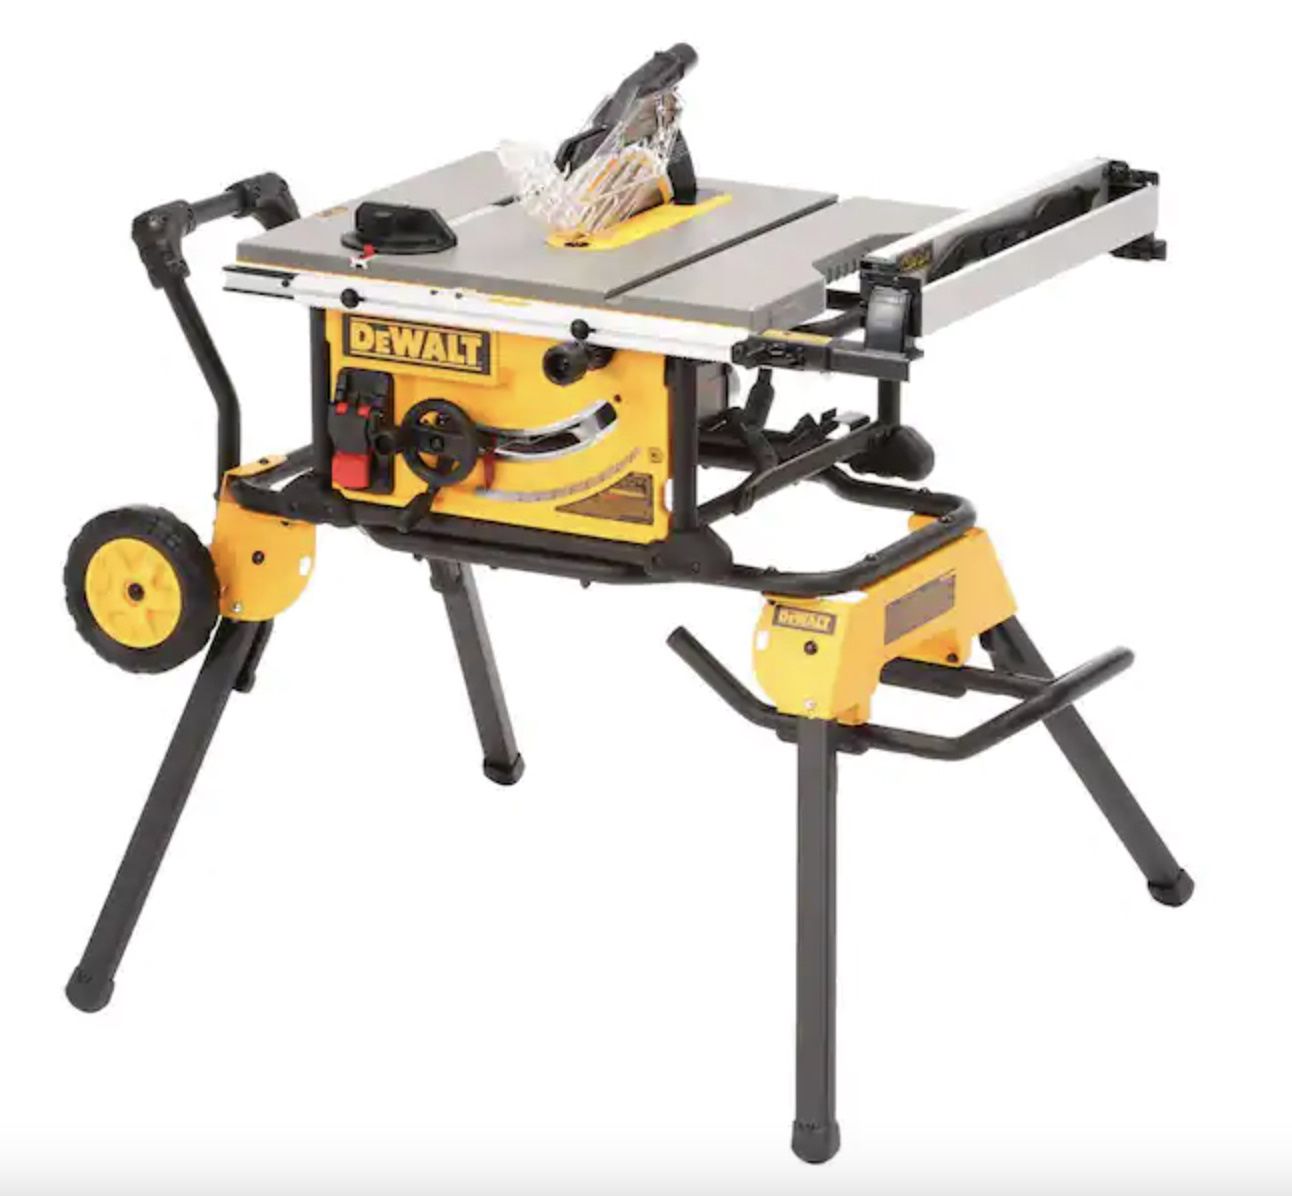 Dewalt 15 Amp Corded 10 in. Job Site Table Saw with Rolling Stand 